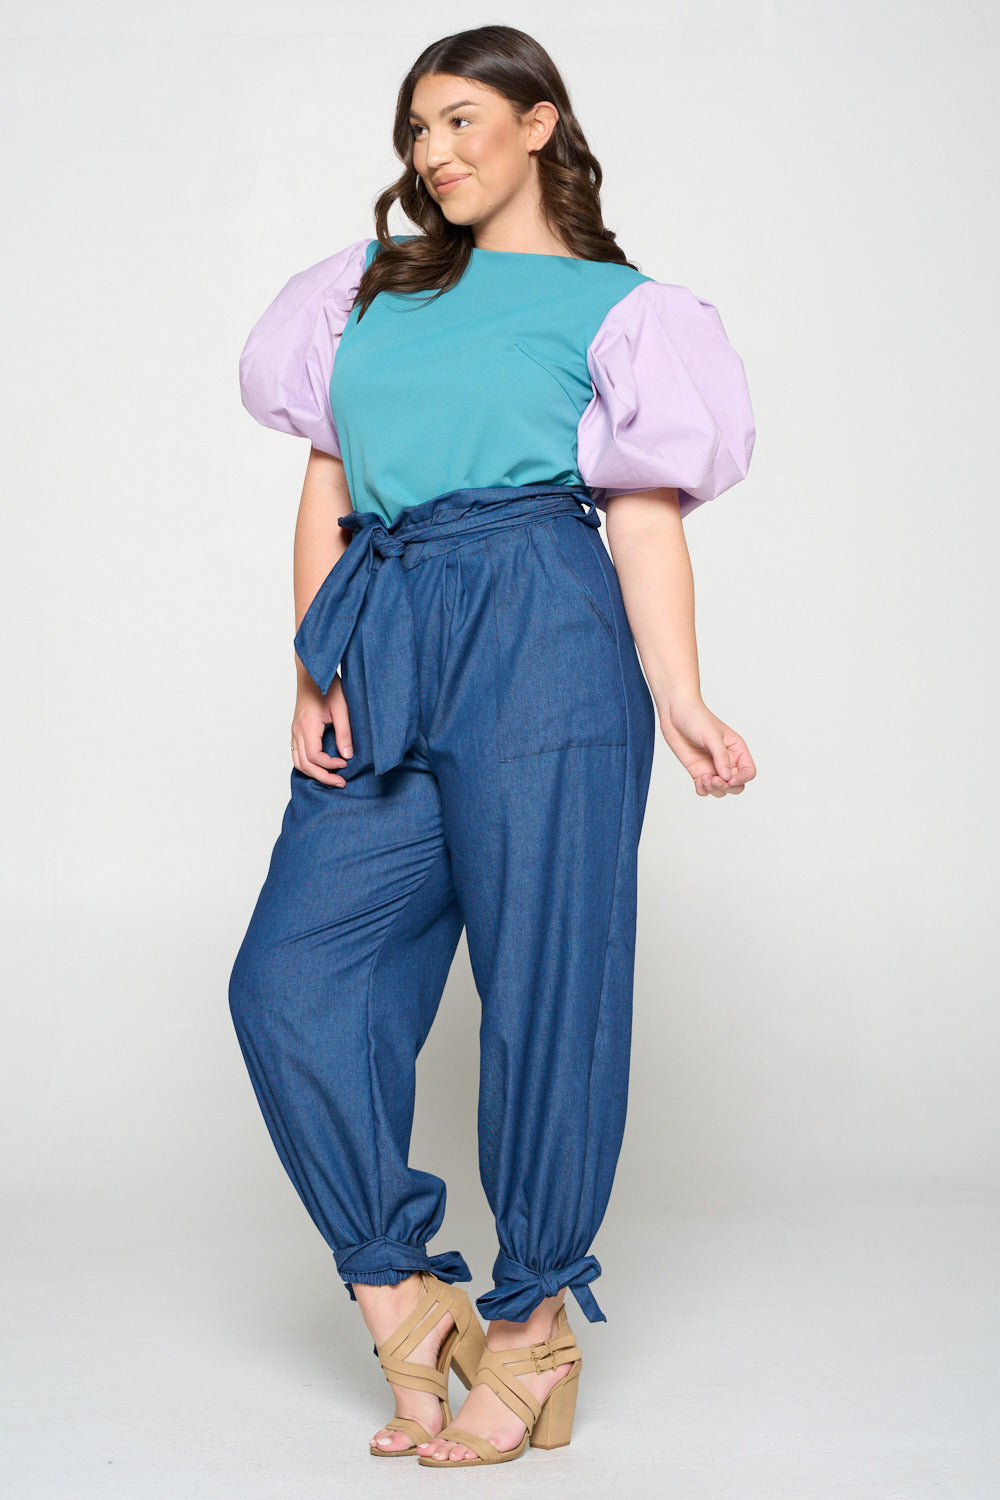 livd apparel plus size boutique contemporary paperbag denim pants with waist tie and leg cuff ribbons in navy denim